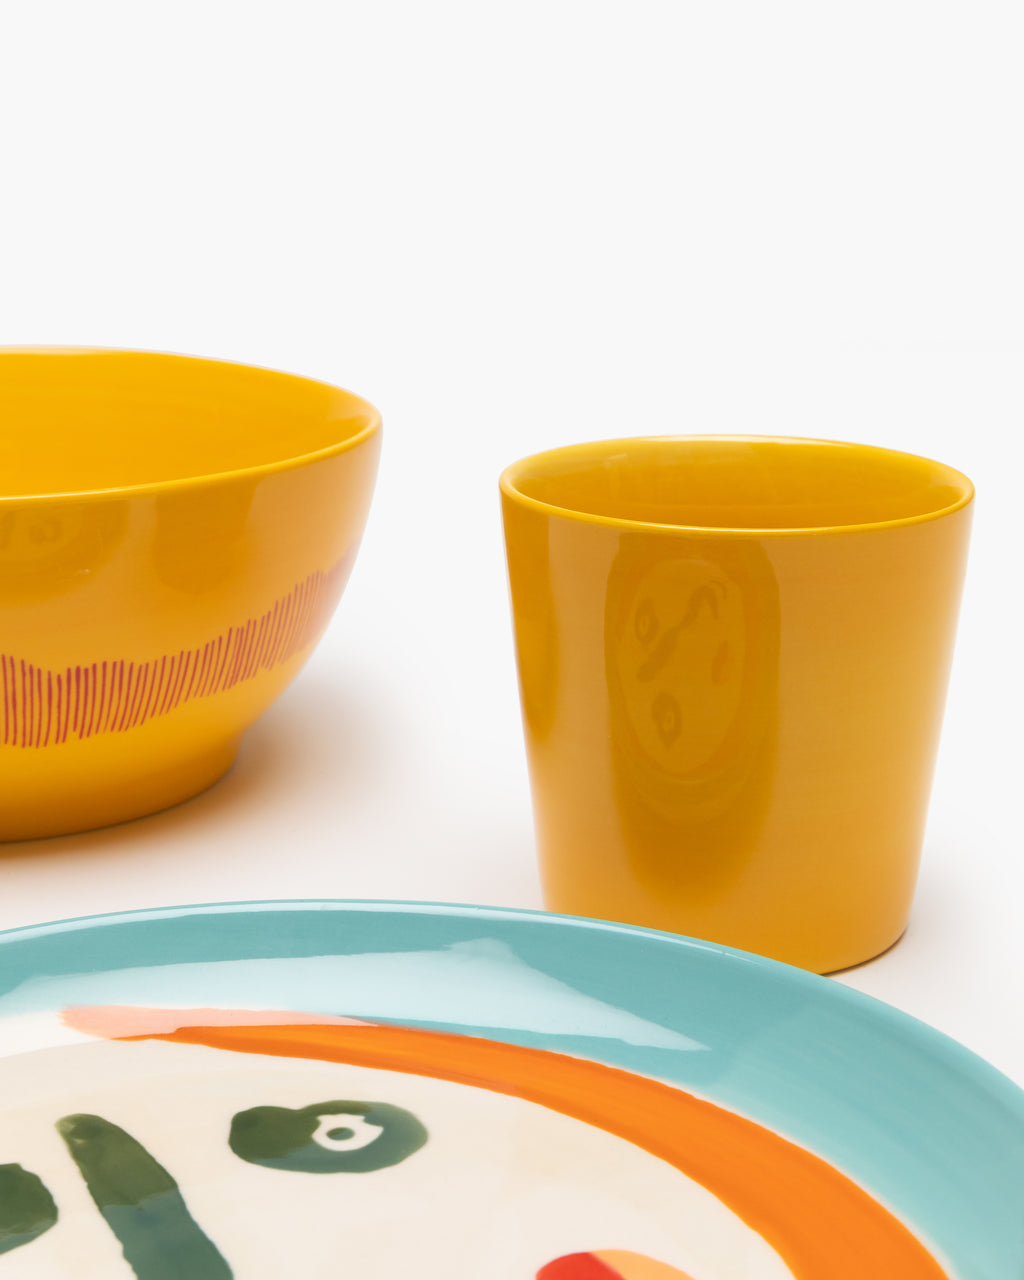 Breakfast Set 12 pieces - Feast tableware by Ottolenghi - yellow